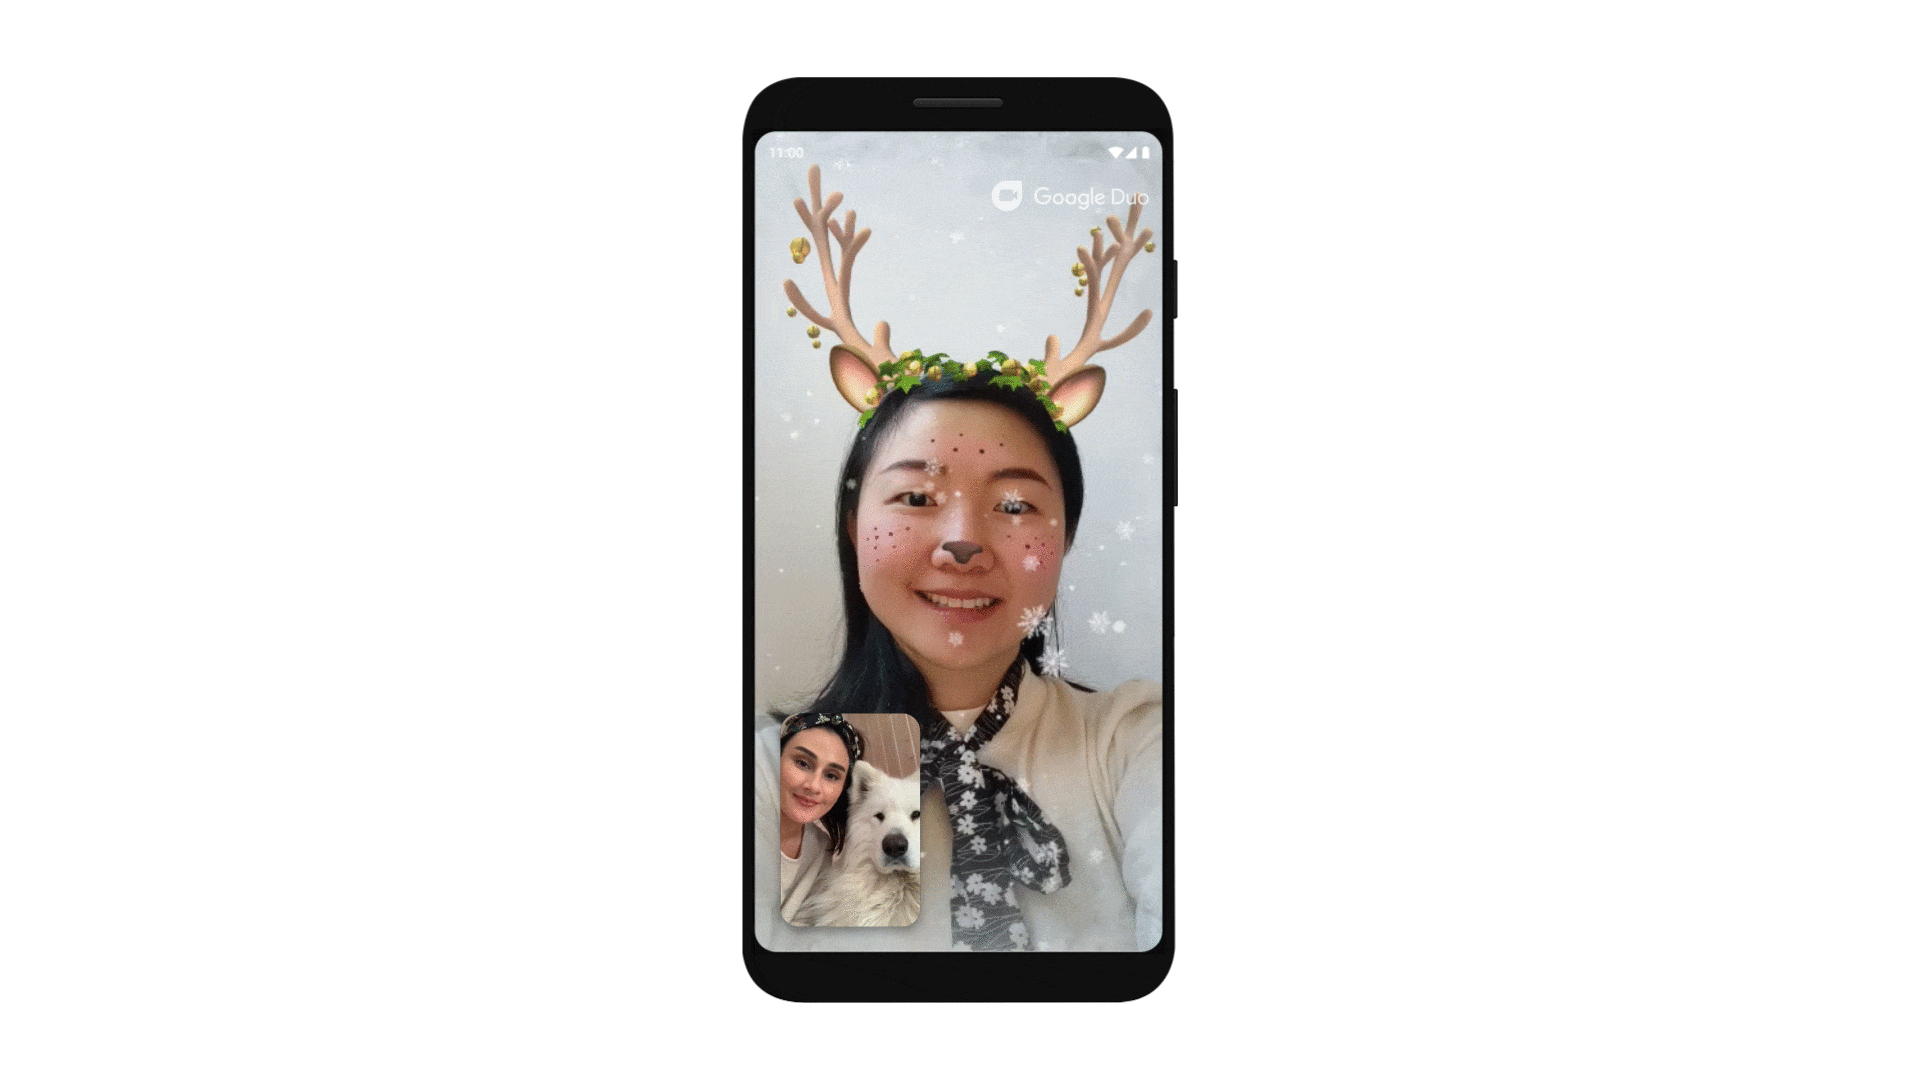 A Google Duo video call using holiday reindeer effects.